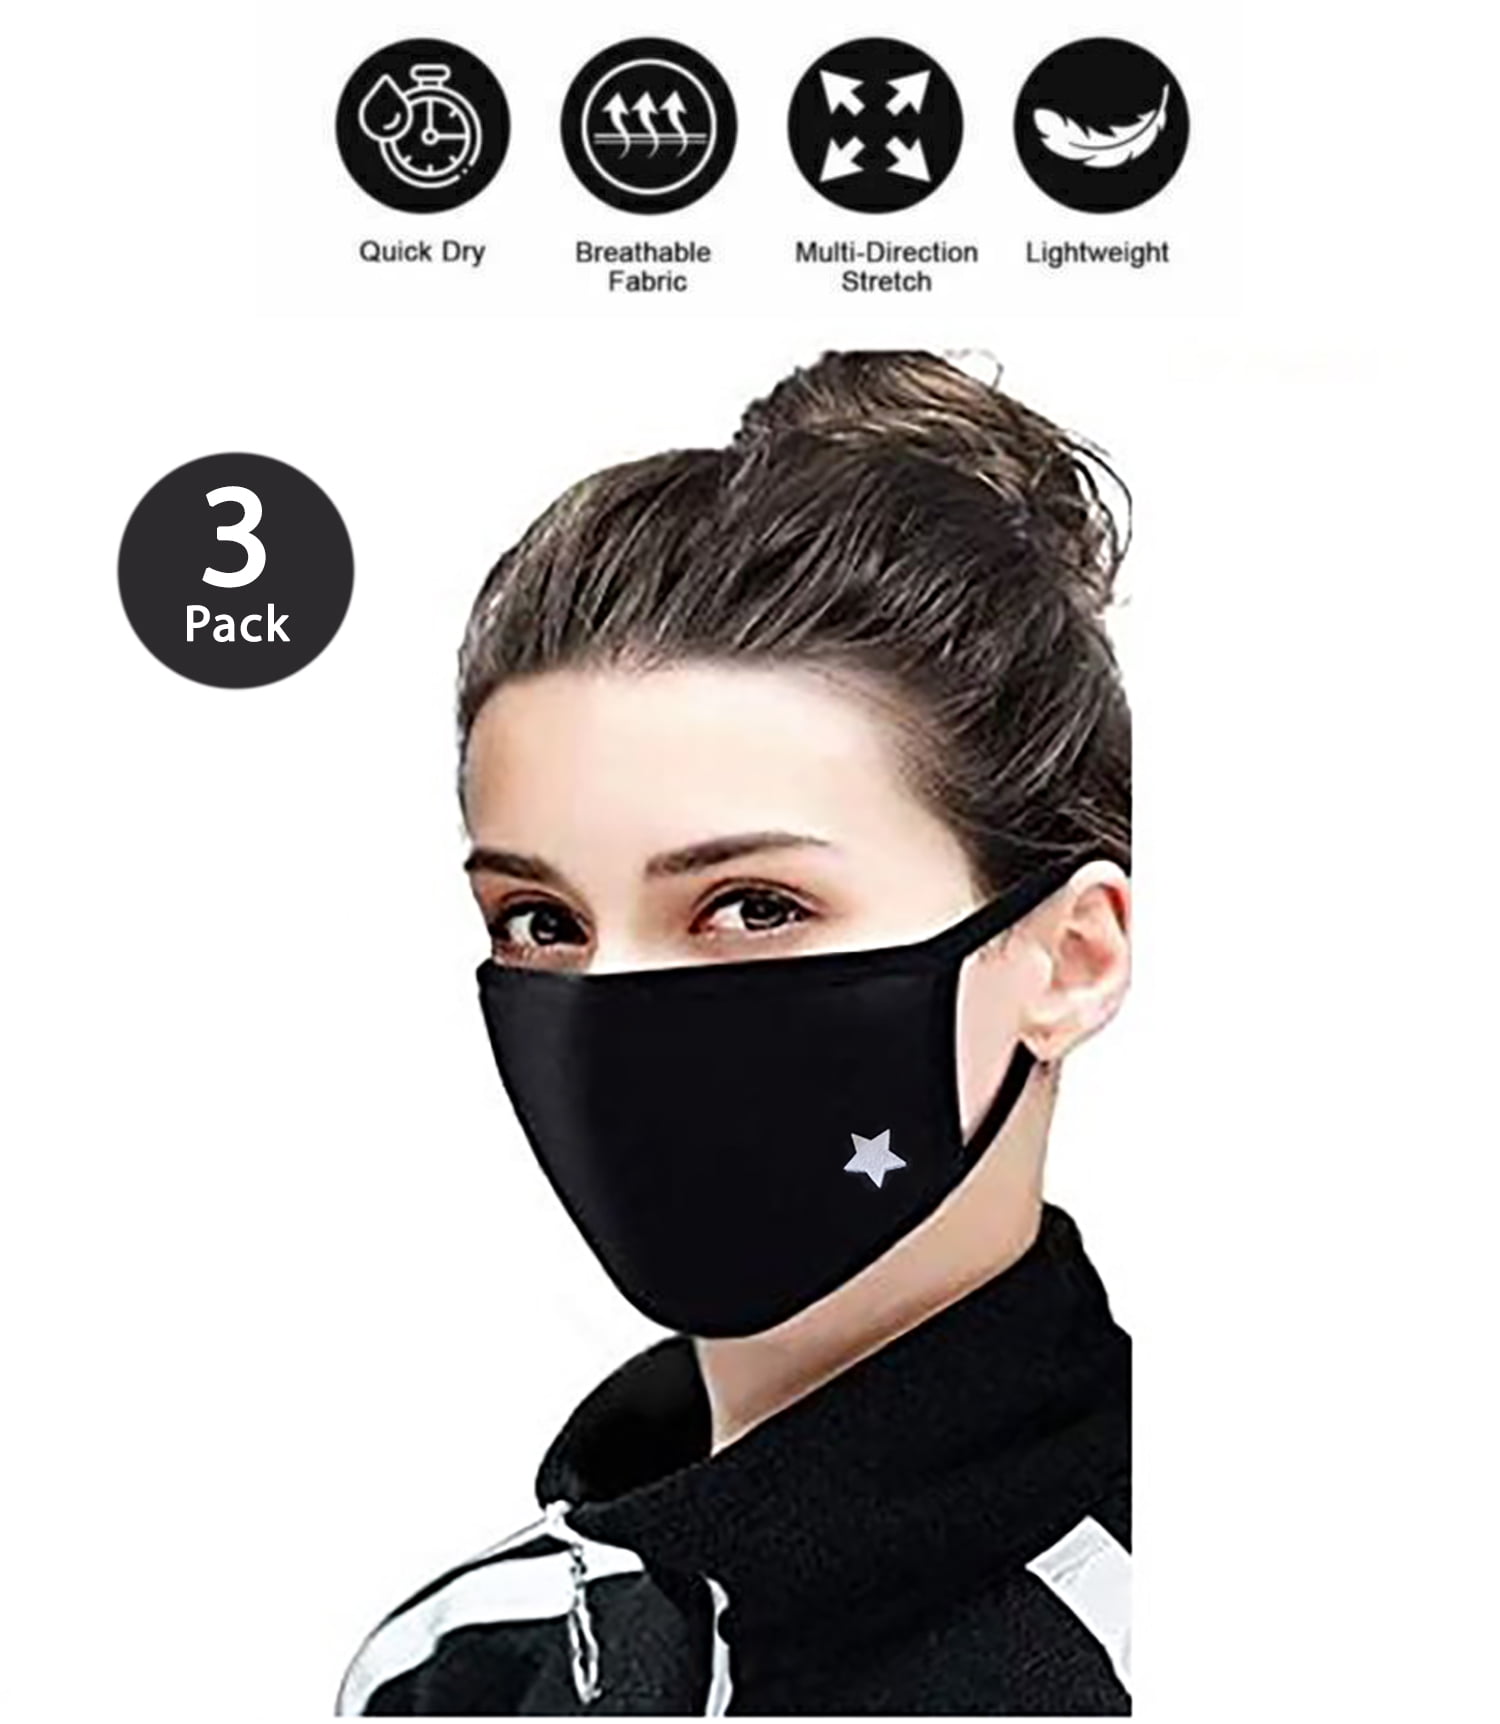 Nose Mask Pollen Protection Dust Cotton Washable Reusable Adjustable Straps  Winter Nose Warmer Adult Size Nose Cover 